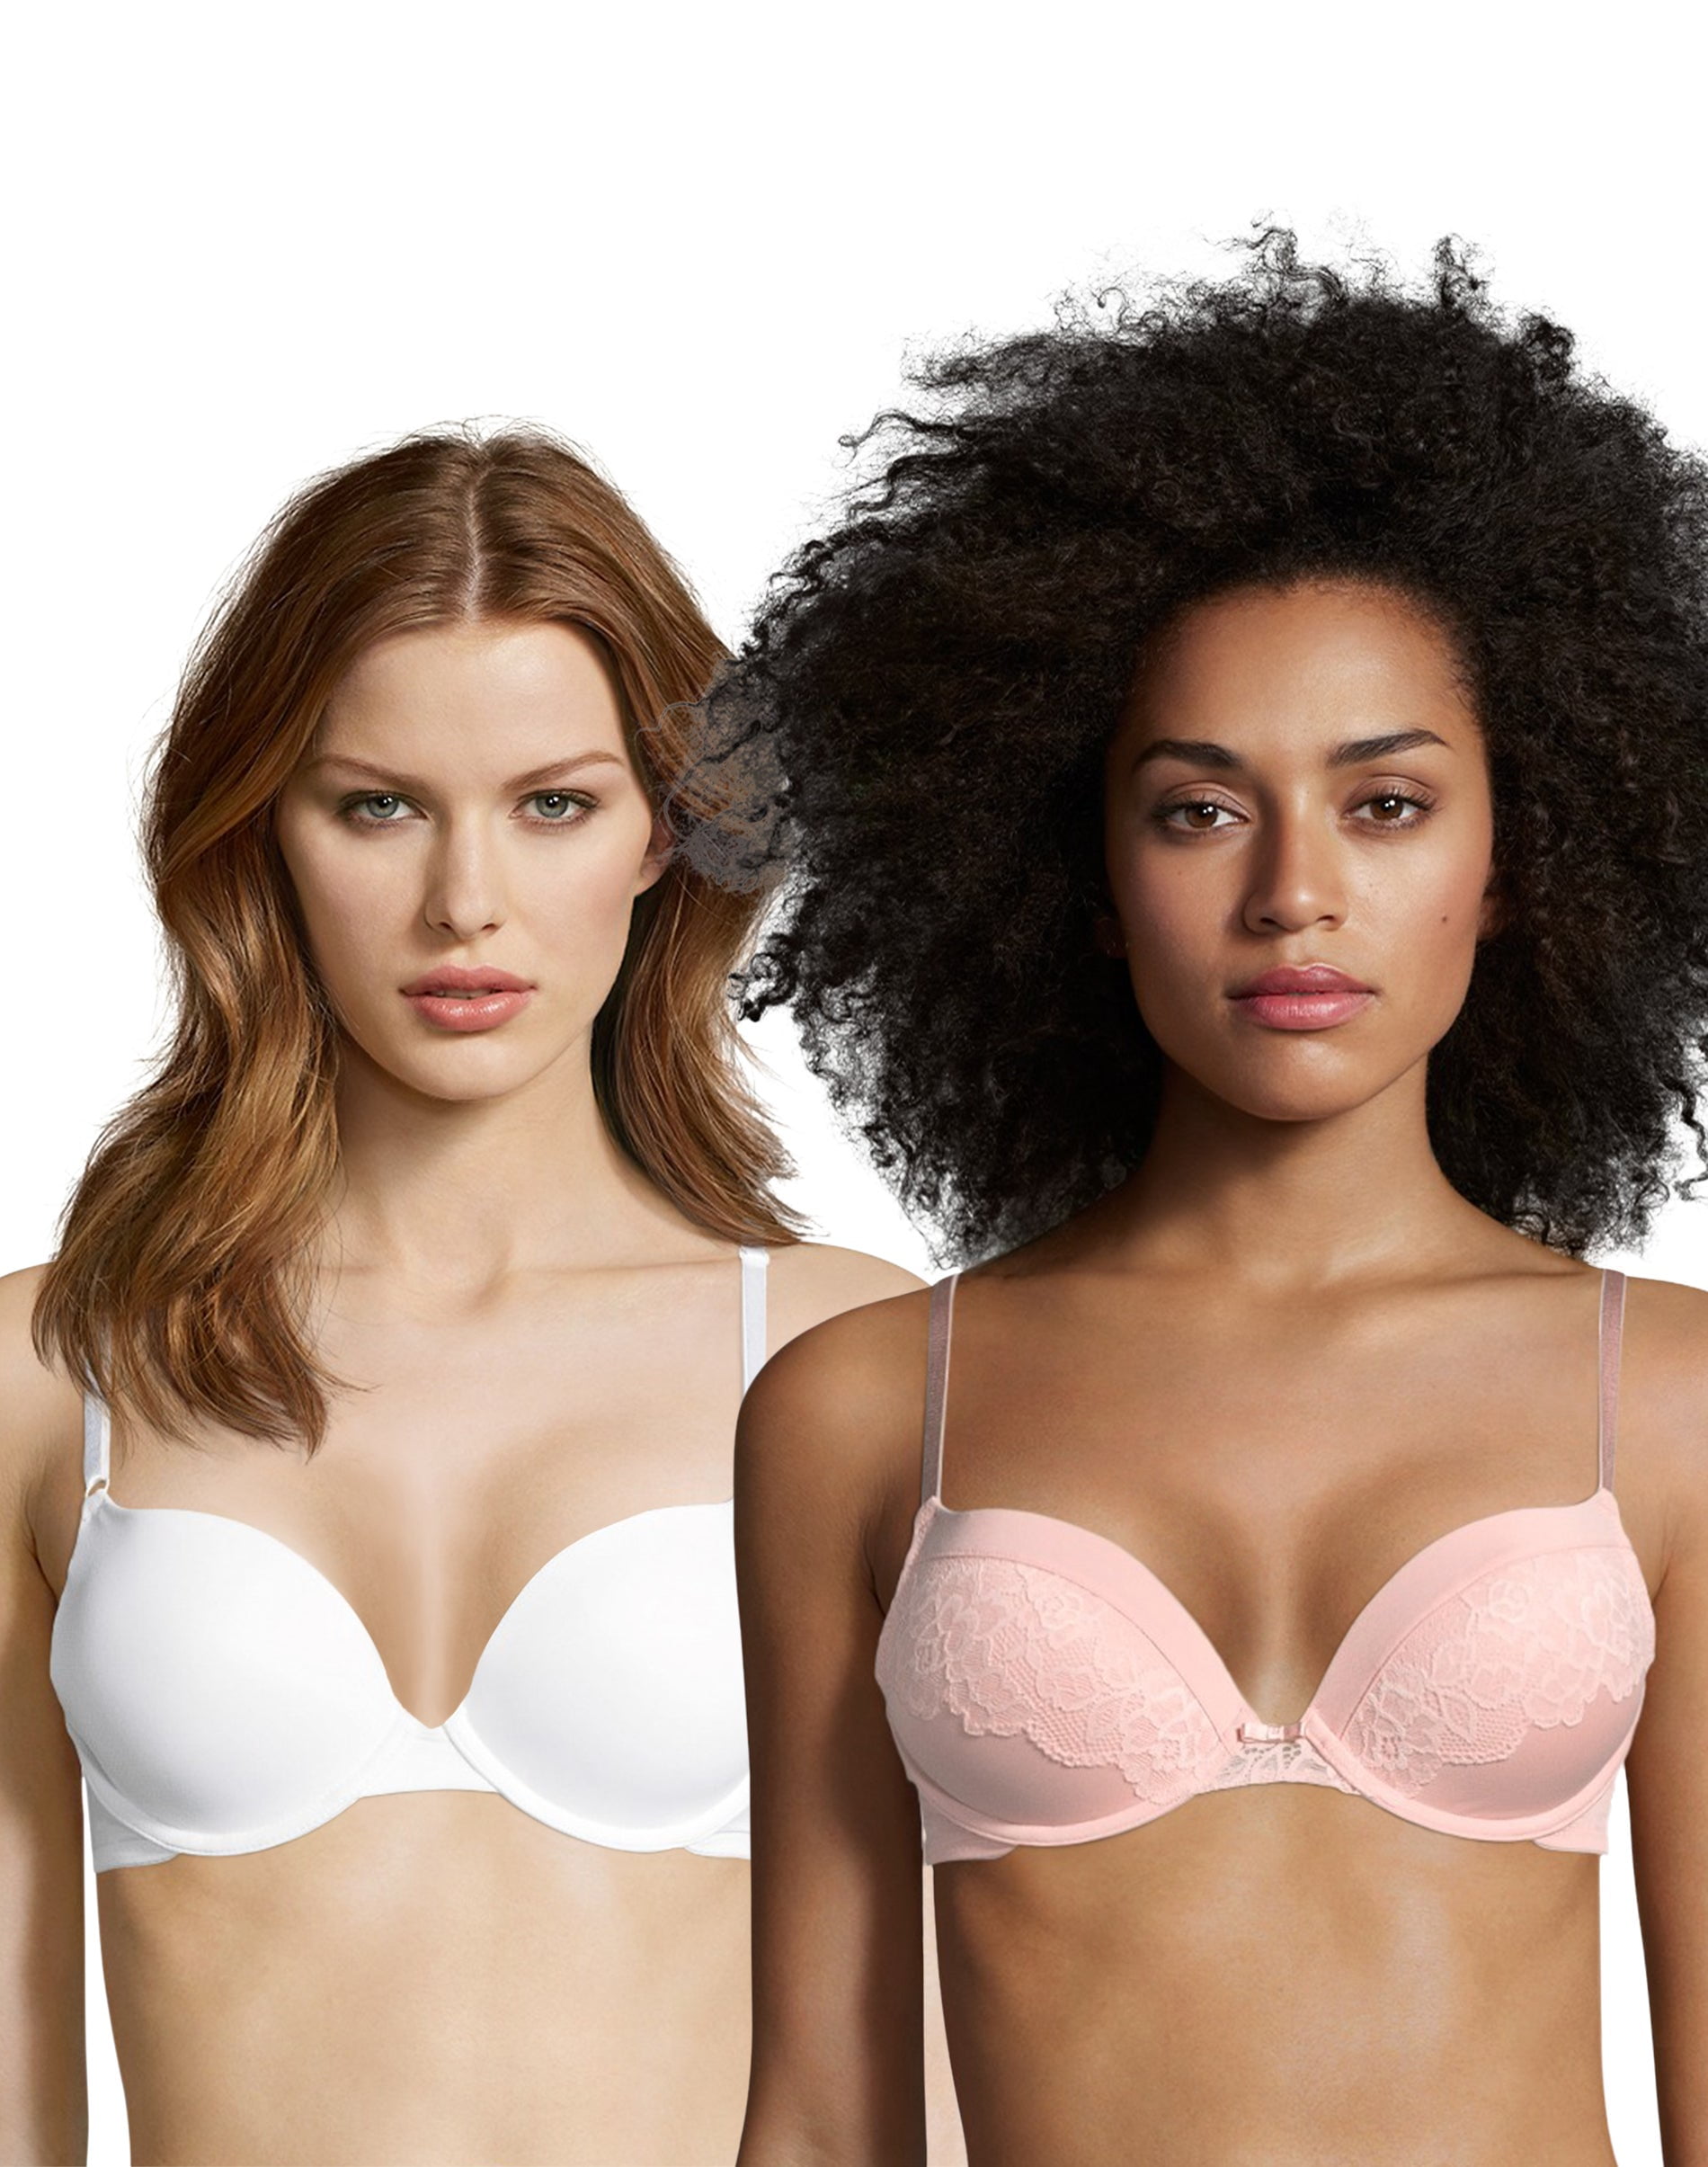 Maidenform Push-Up Bras - Solid and Lace 2-Pack White/Sheer Pale Pink 40DD  Women's